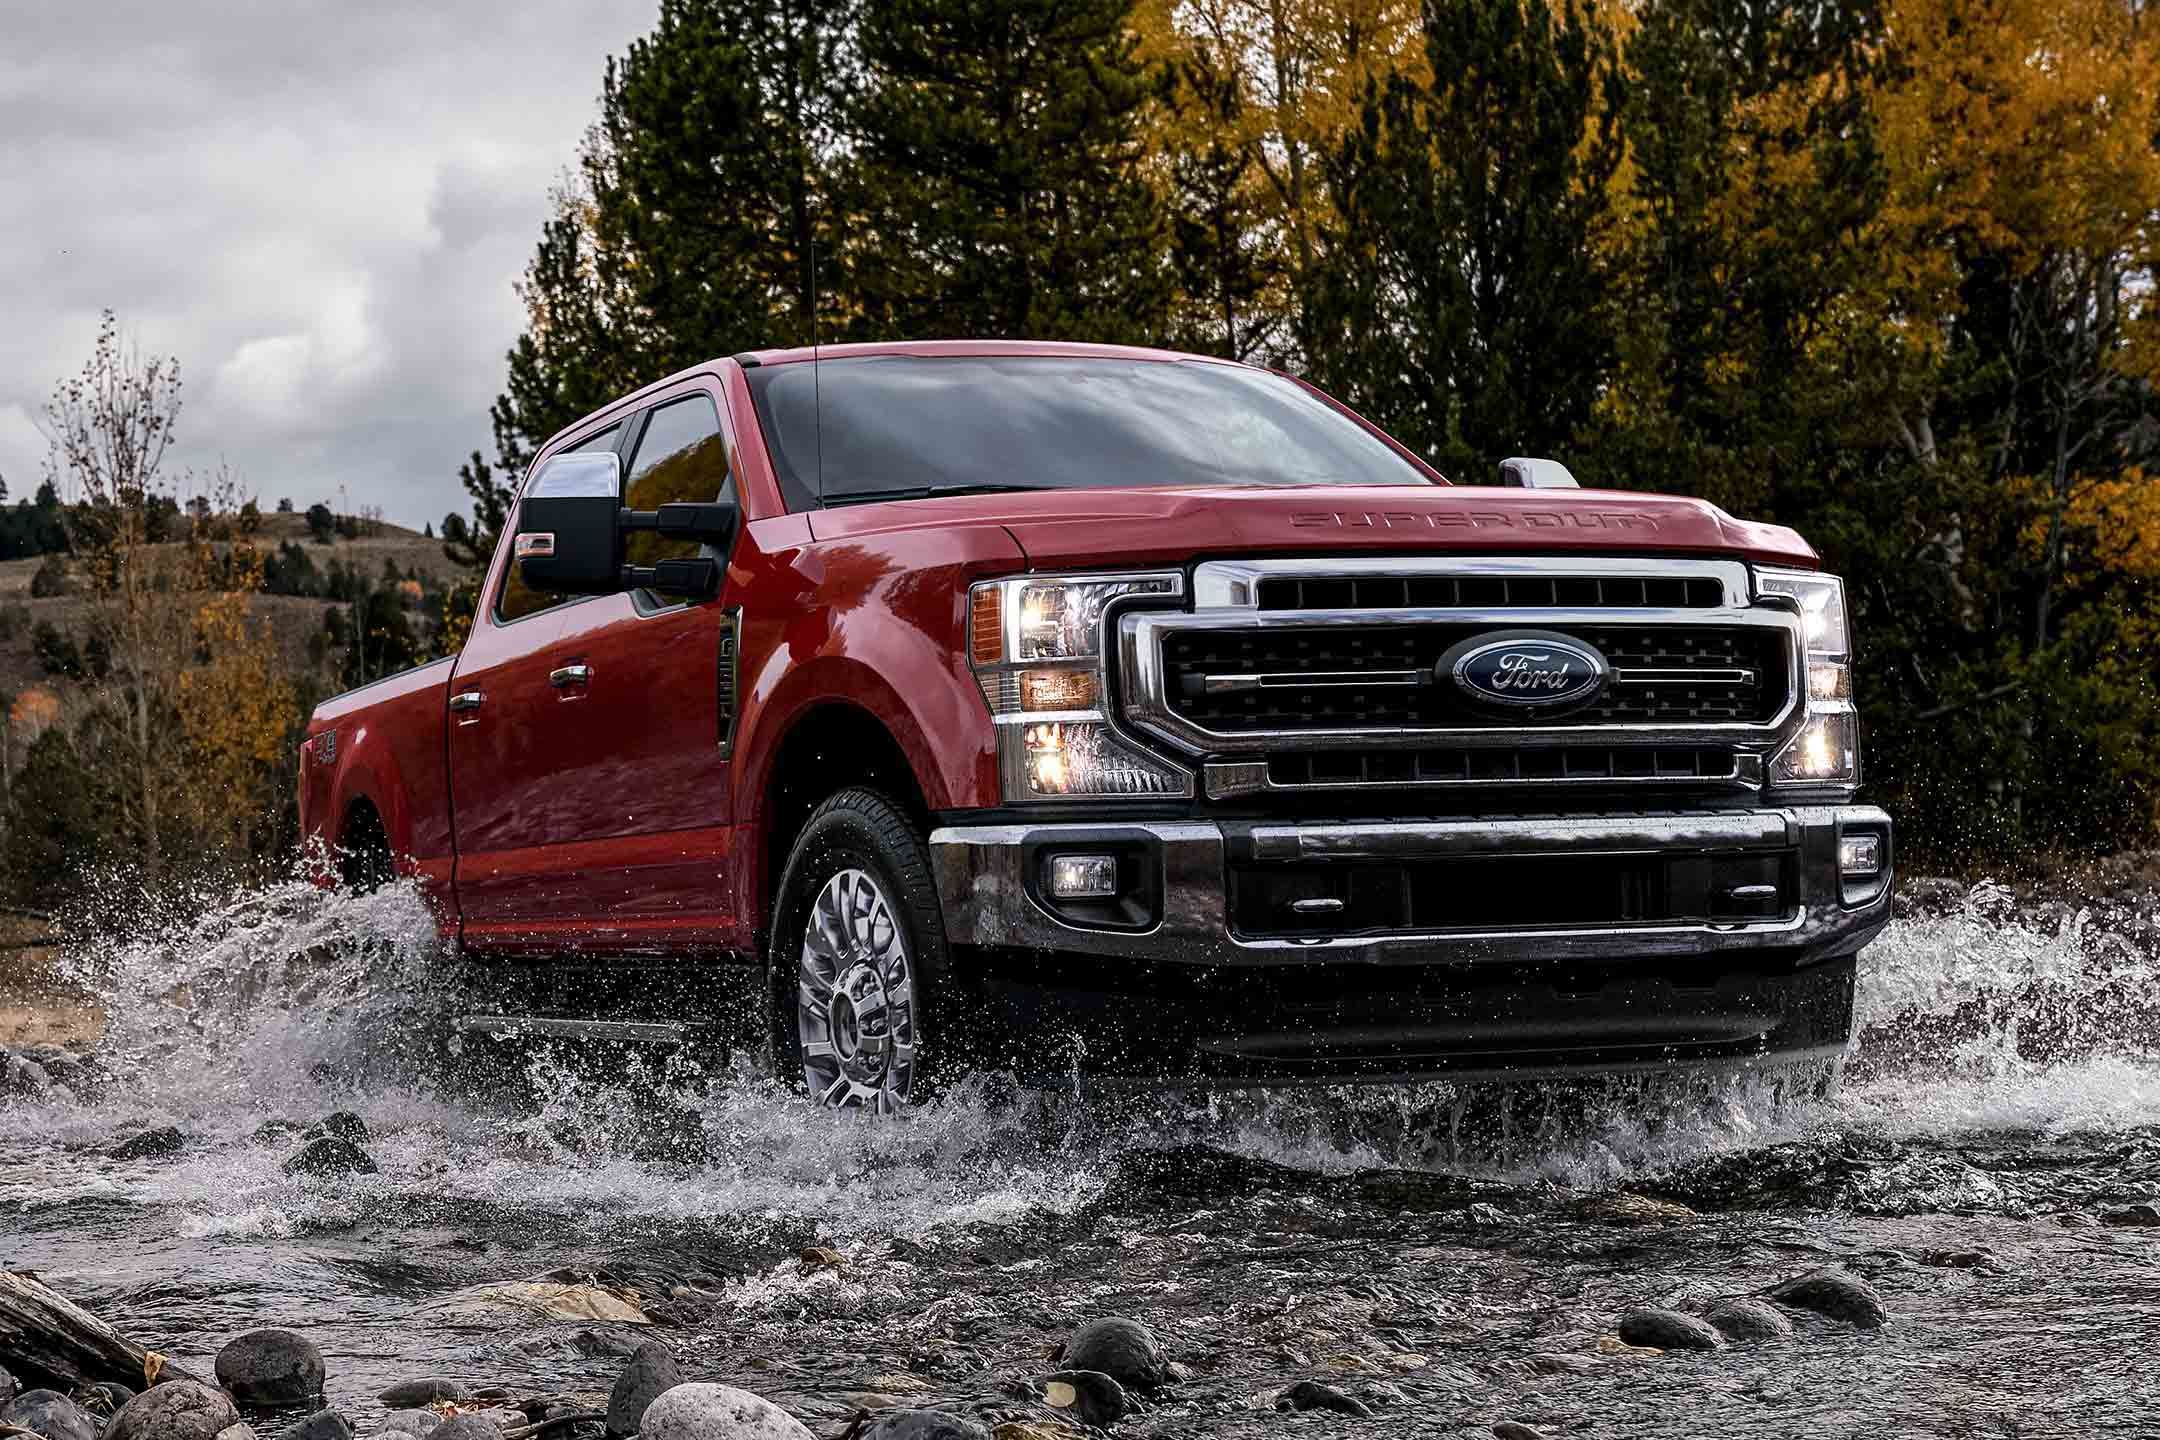 Here's What Makes The Ford F350 The Most Reliable Diesel Truck